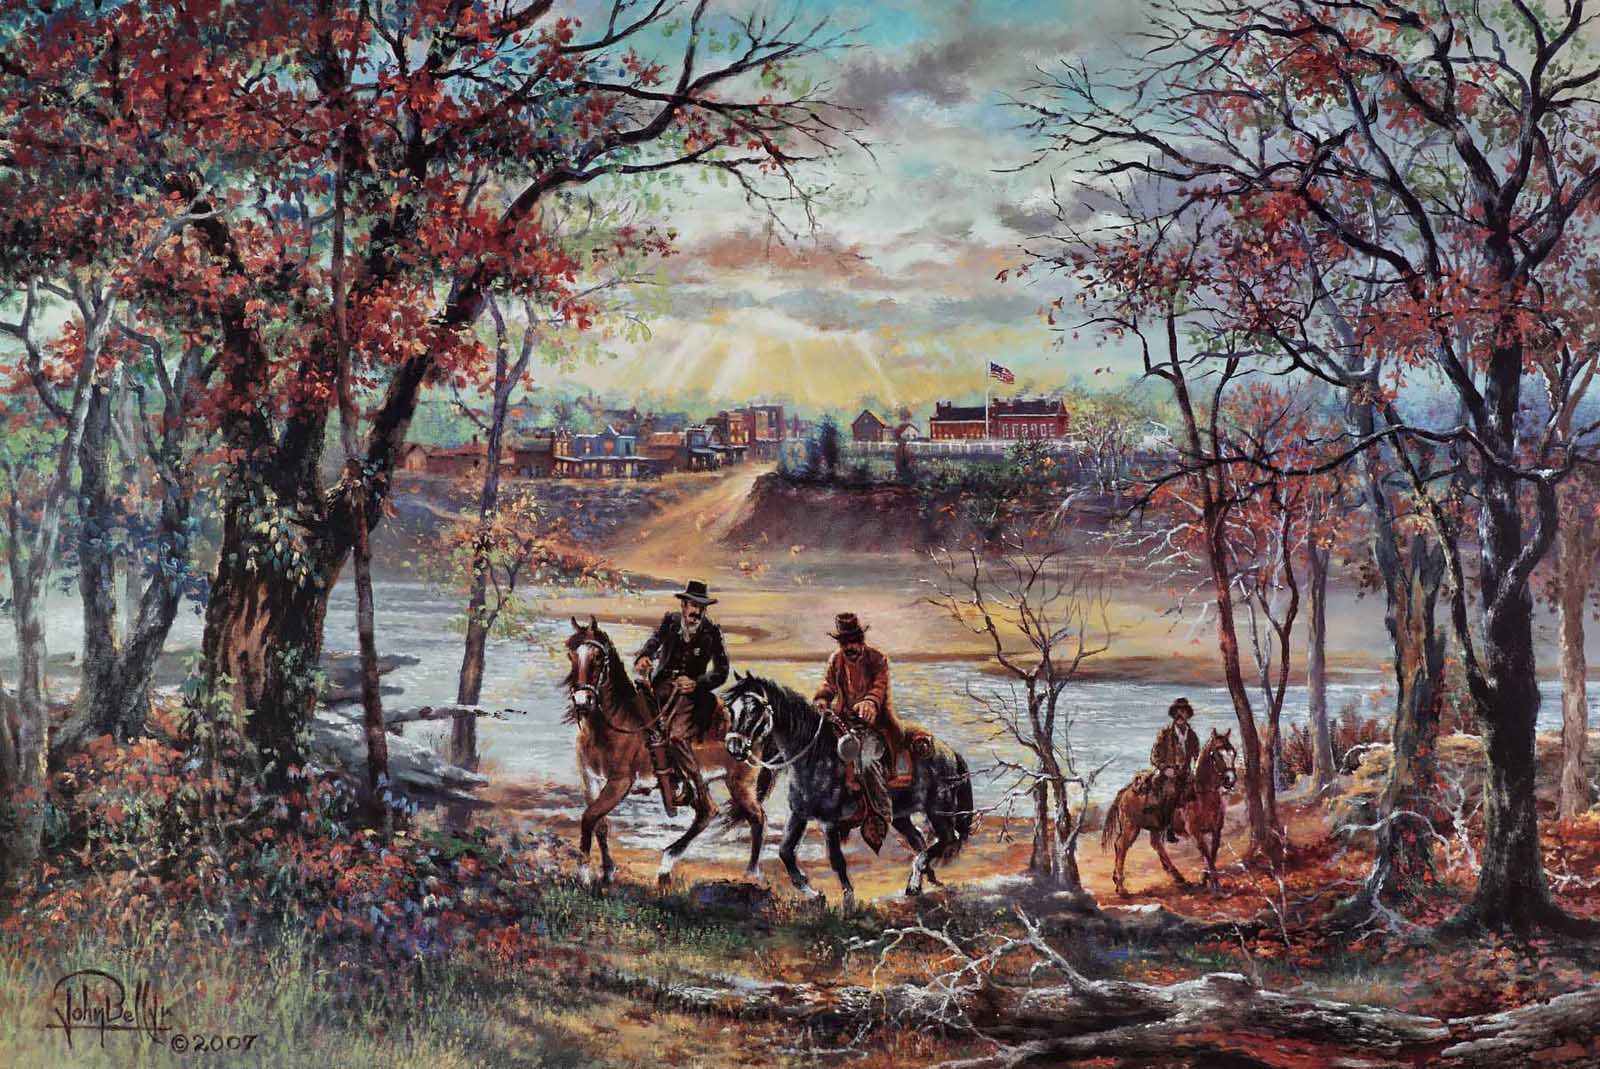 "Into the Territory" U.S. Marshals lithograph